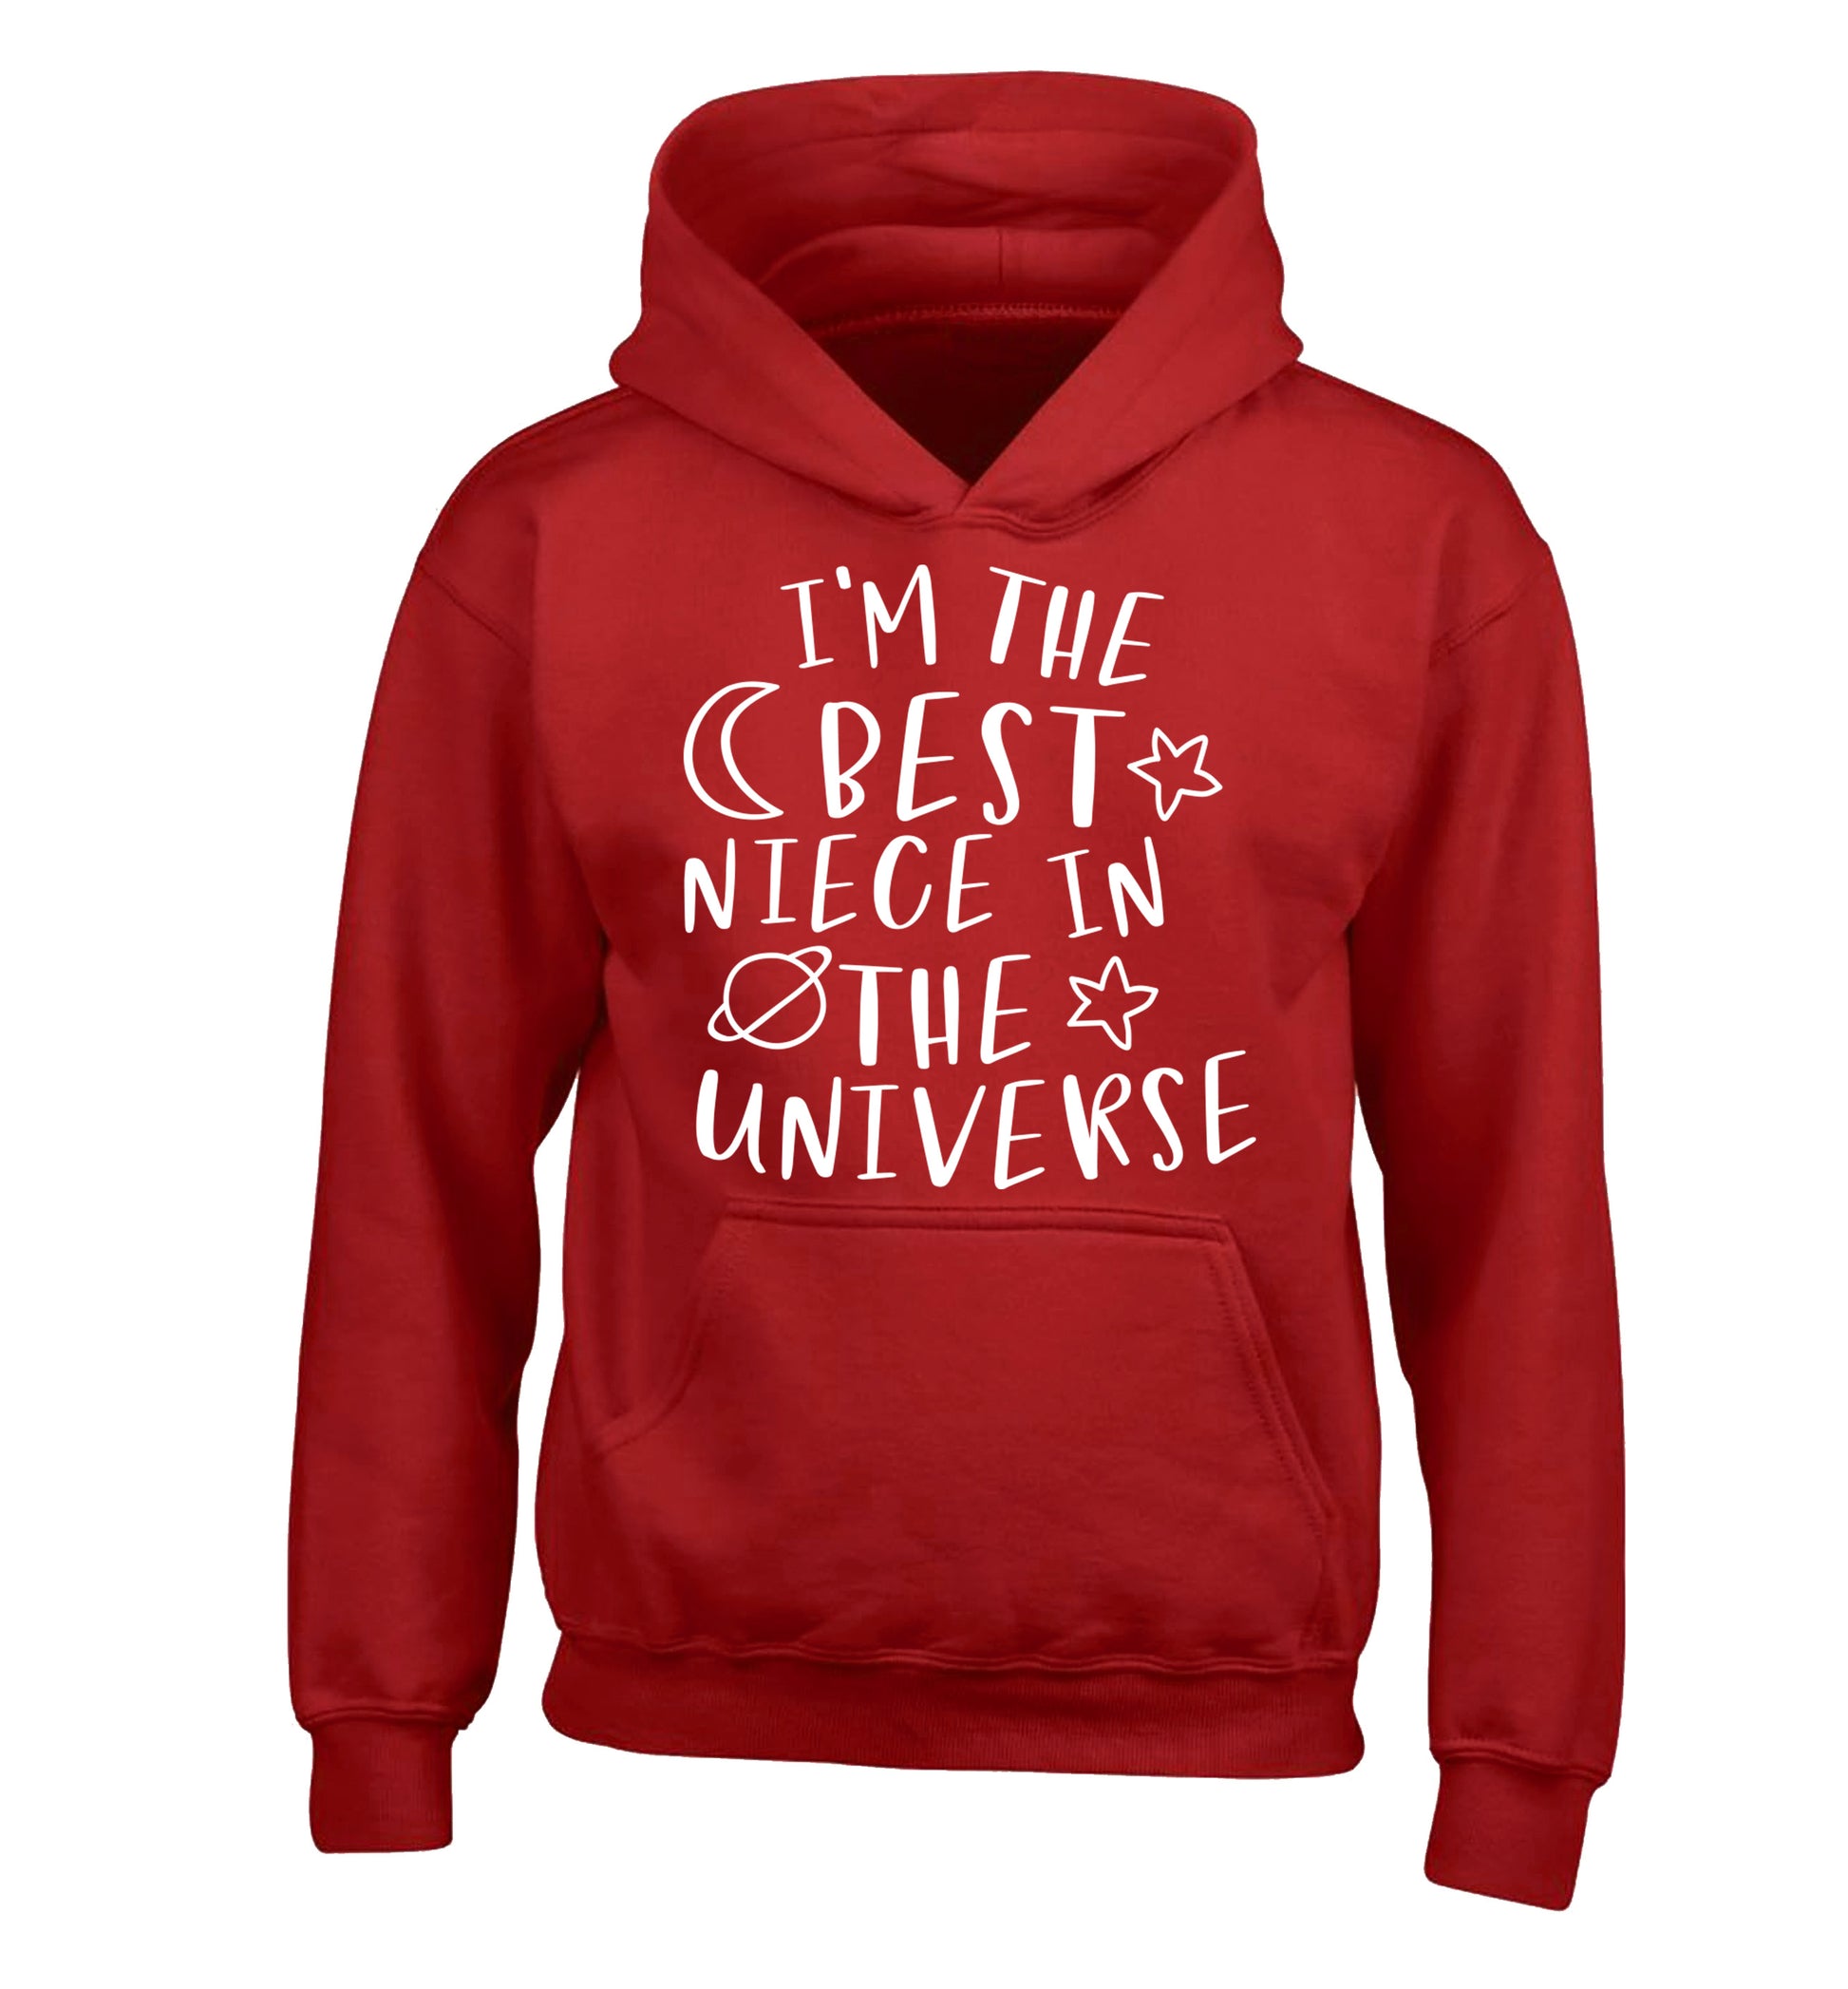 I'm the best niece in the universe children's red hoodie 12-13 Years